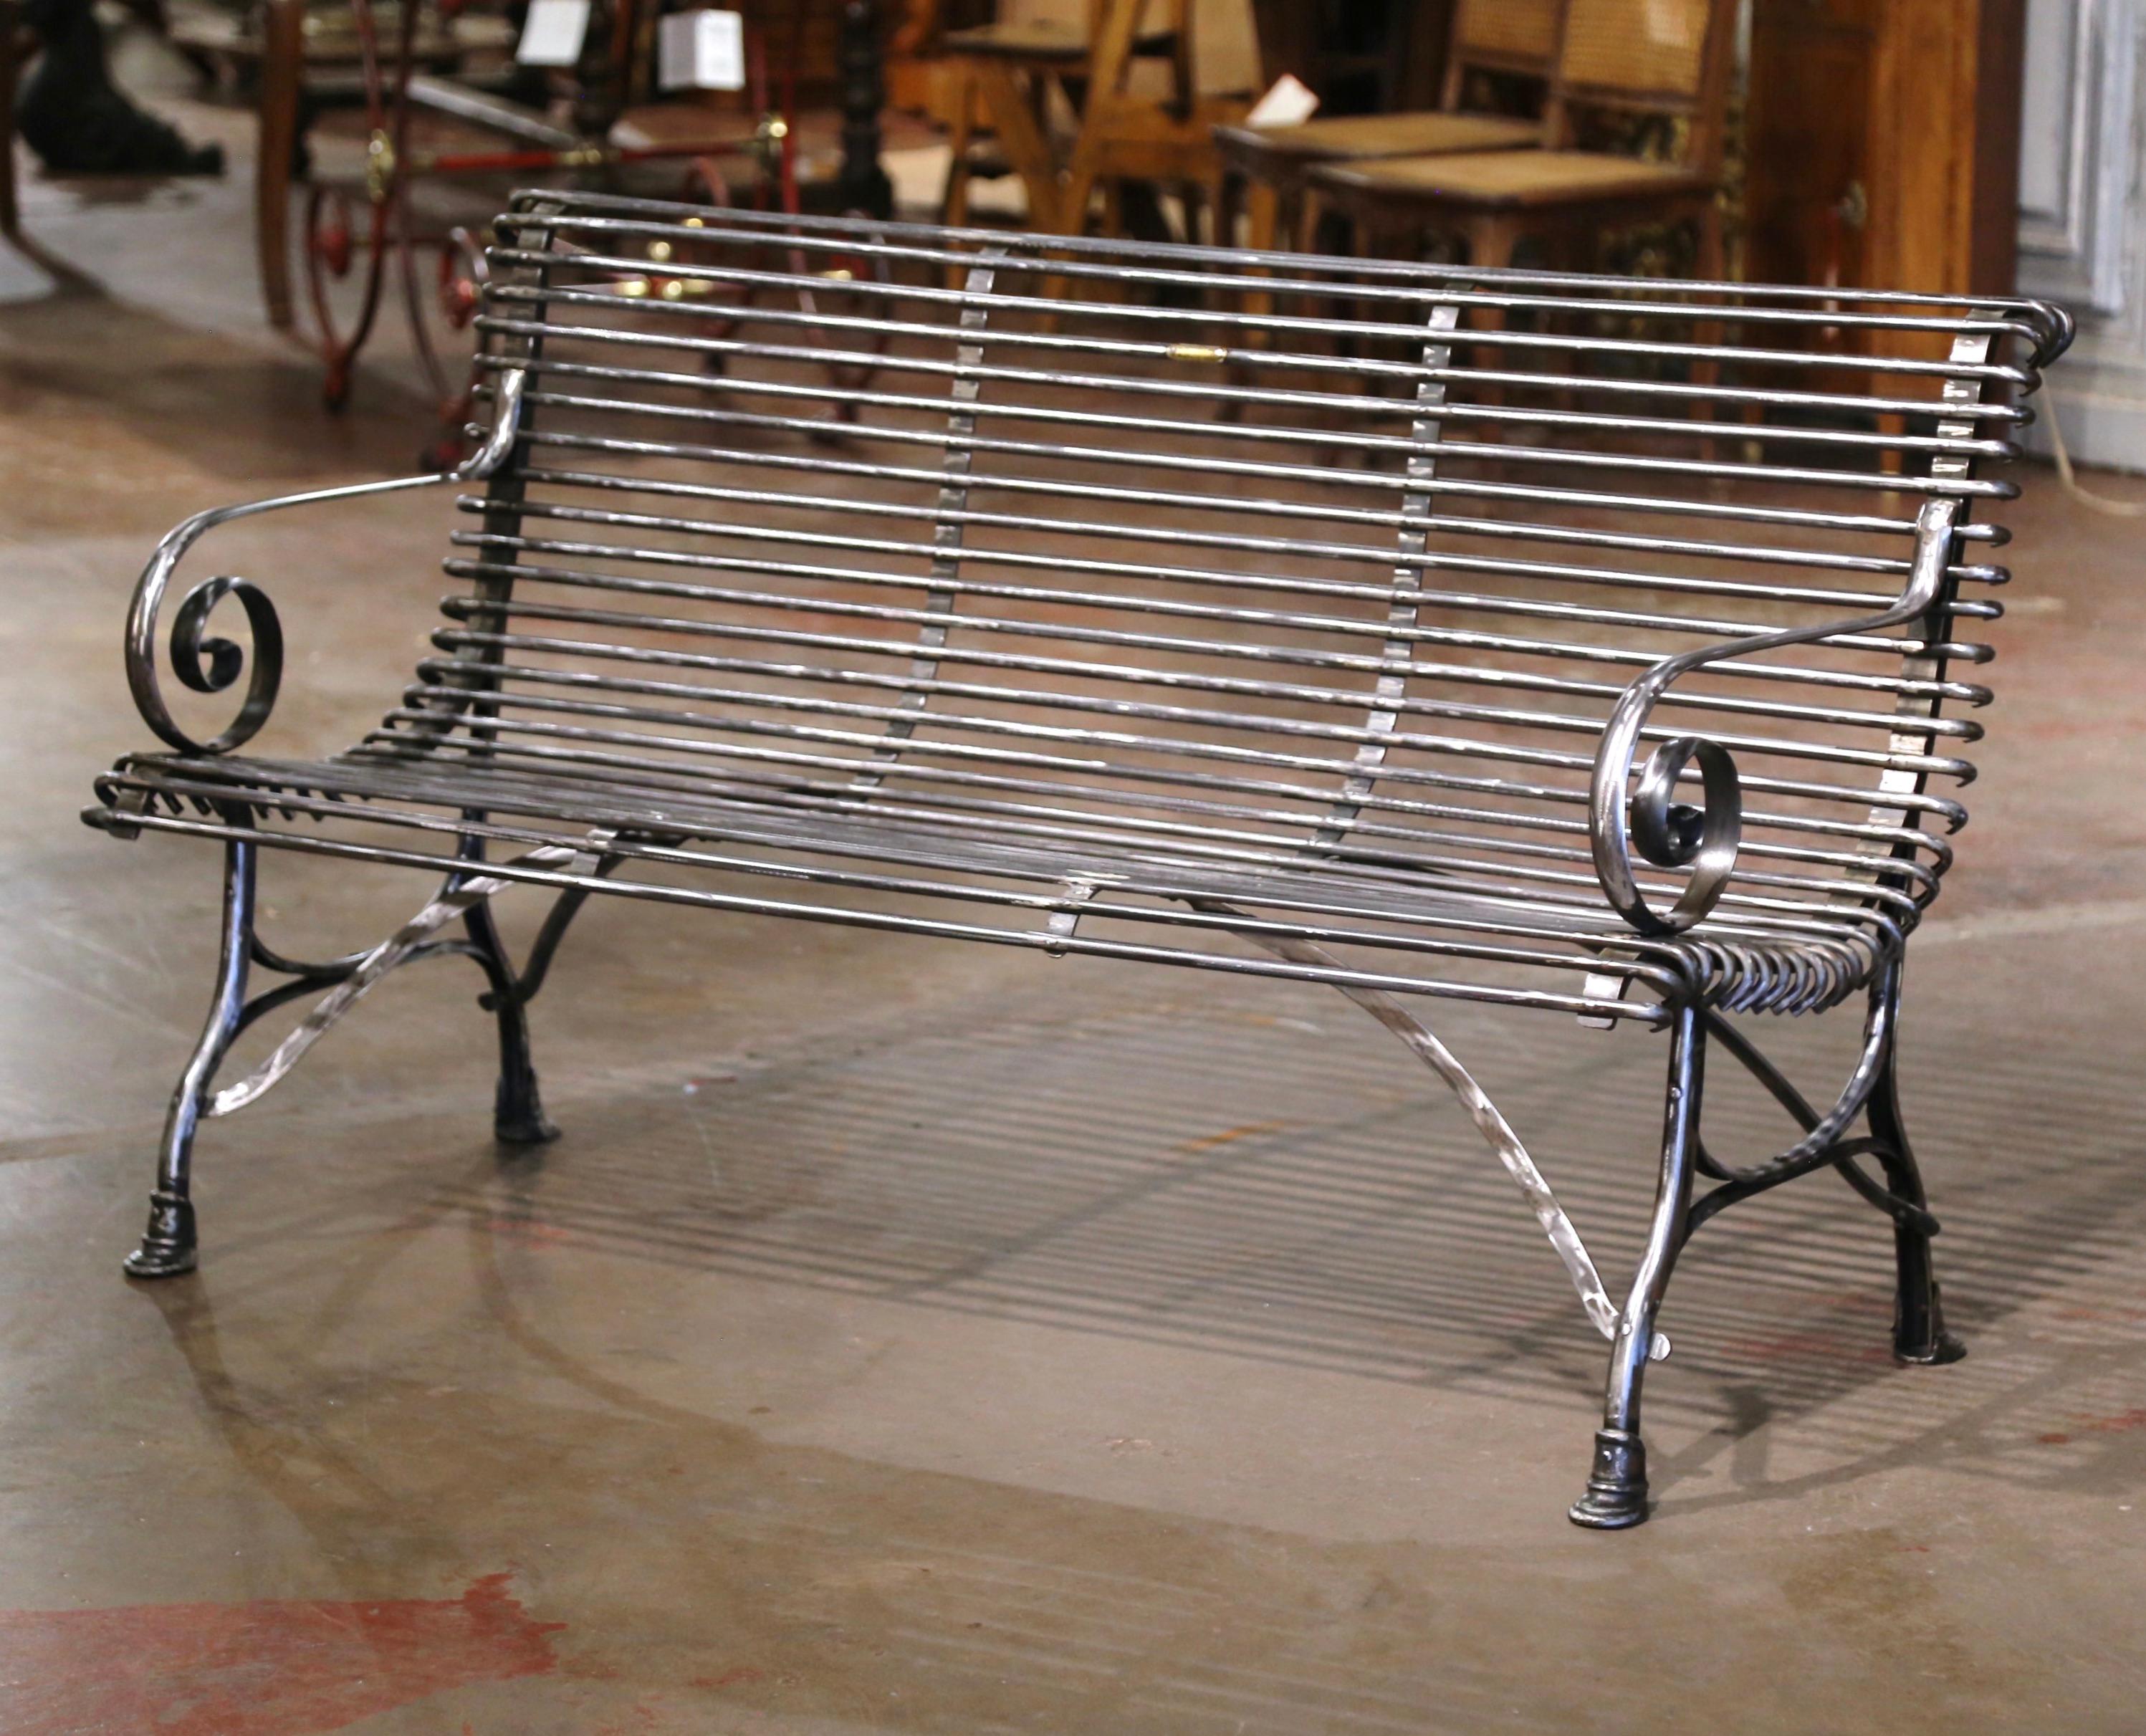 French Polished Iron Three-Seat Bench with Scrolled Arms Signed Sauveur Arras For Sale 1